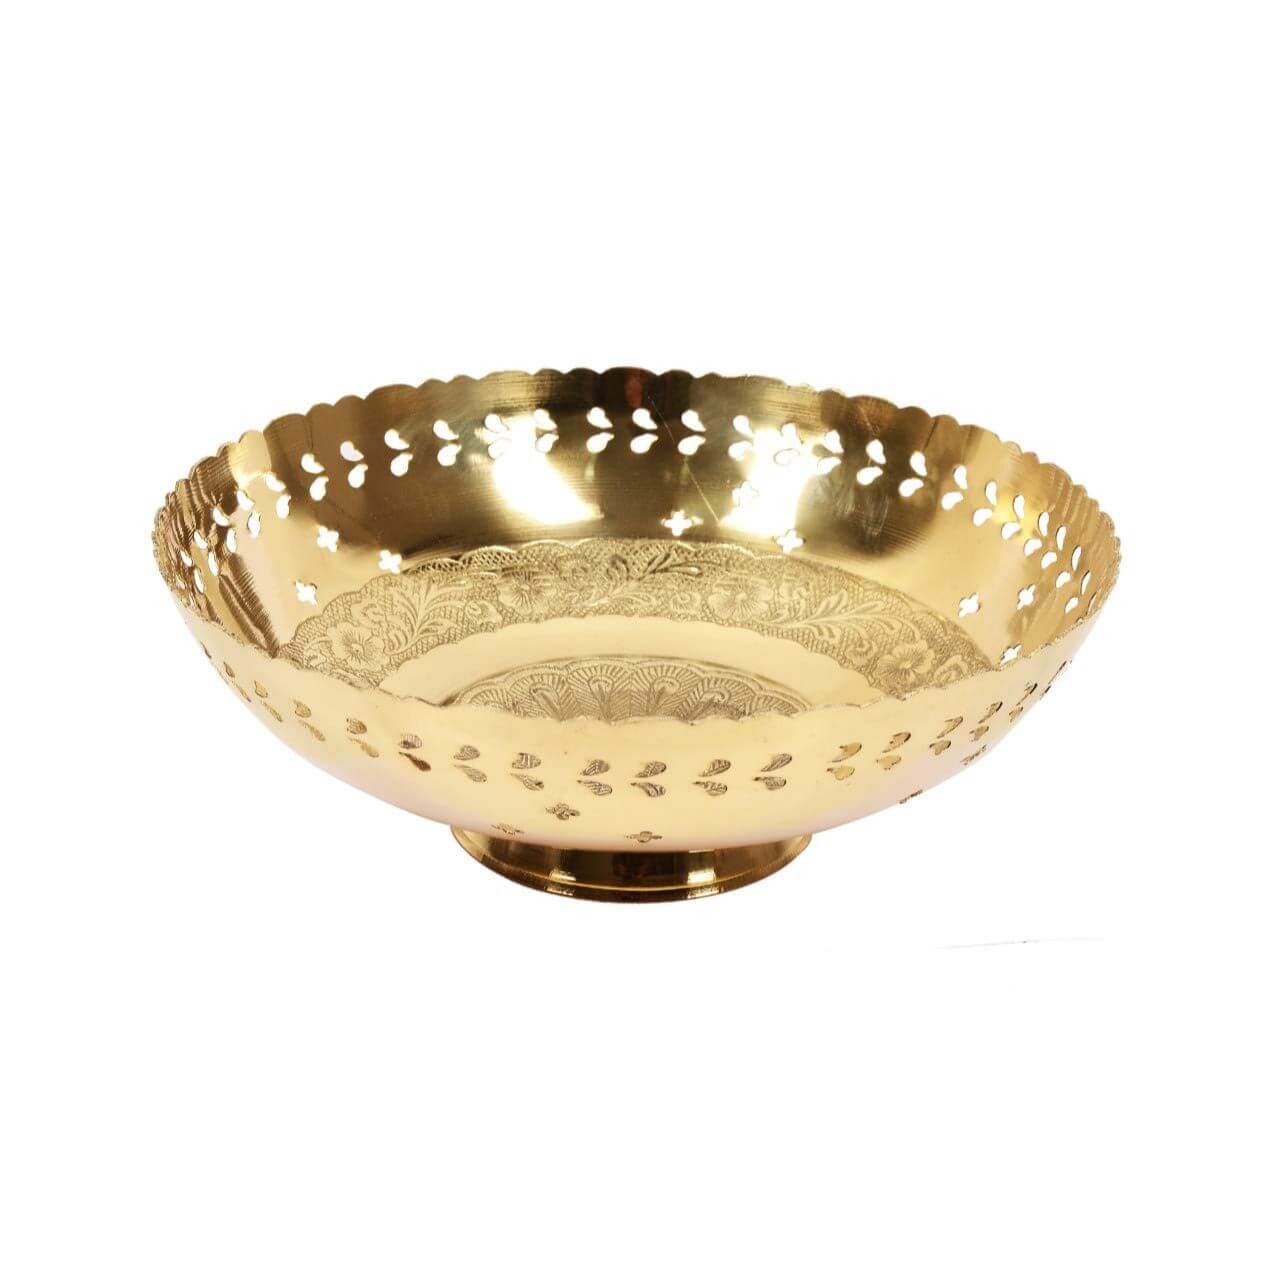 Hand Crafted Metal Brass Fruit Bowl with Decorative Carving Work (Golden, 10 Inch Diameter, 2 Inch Tall)